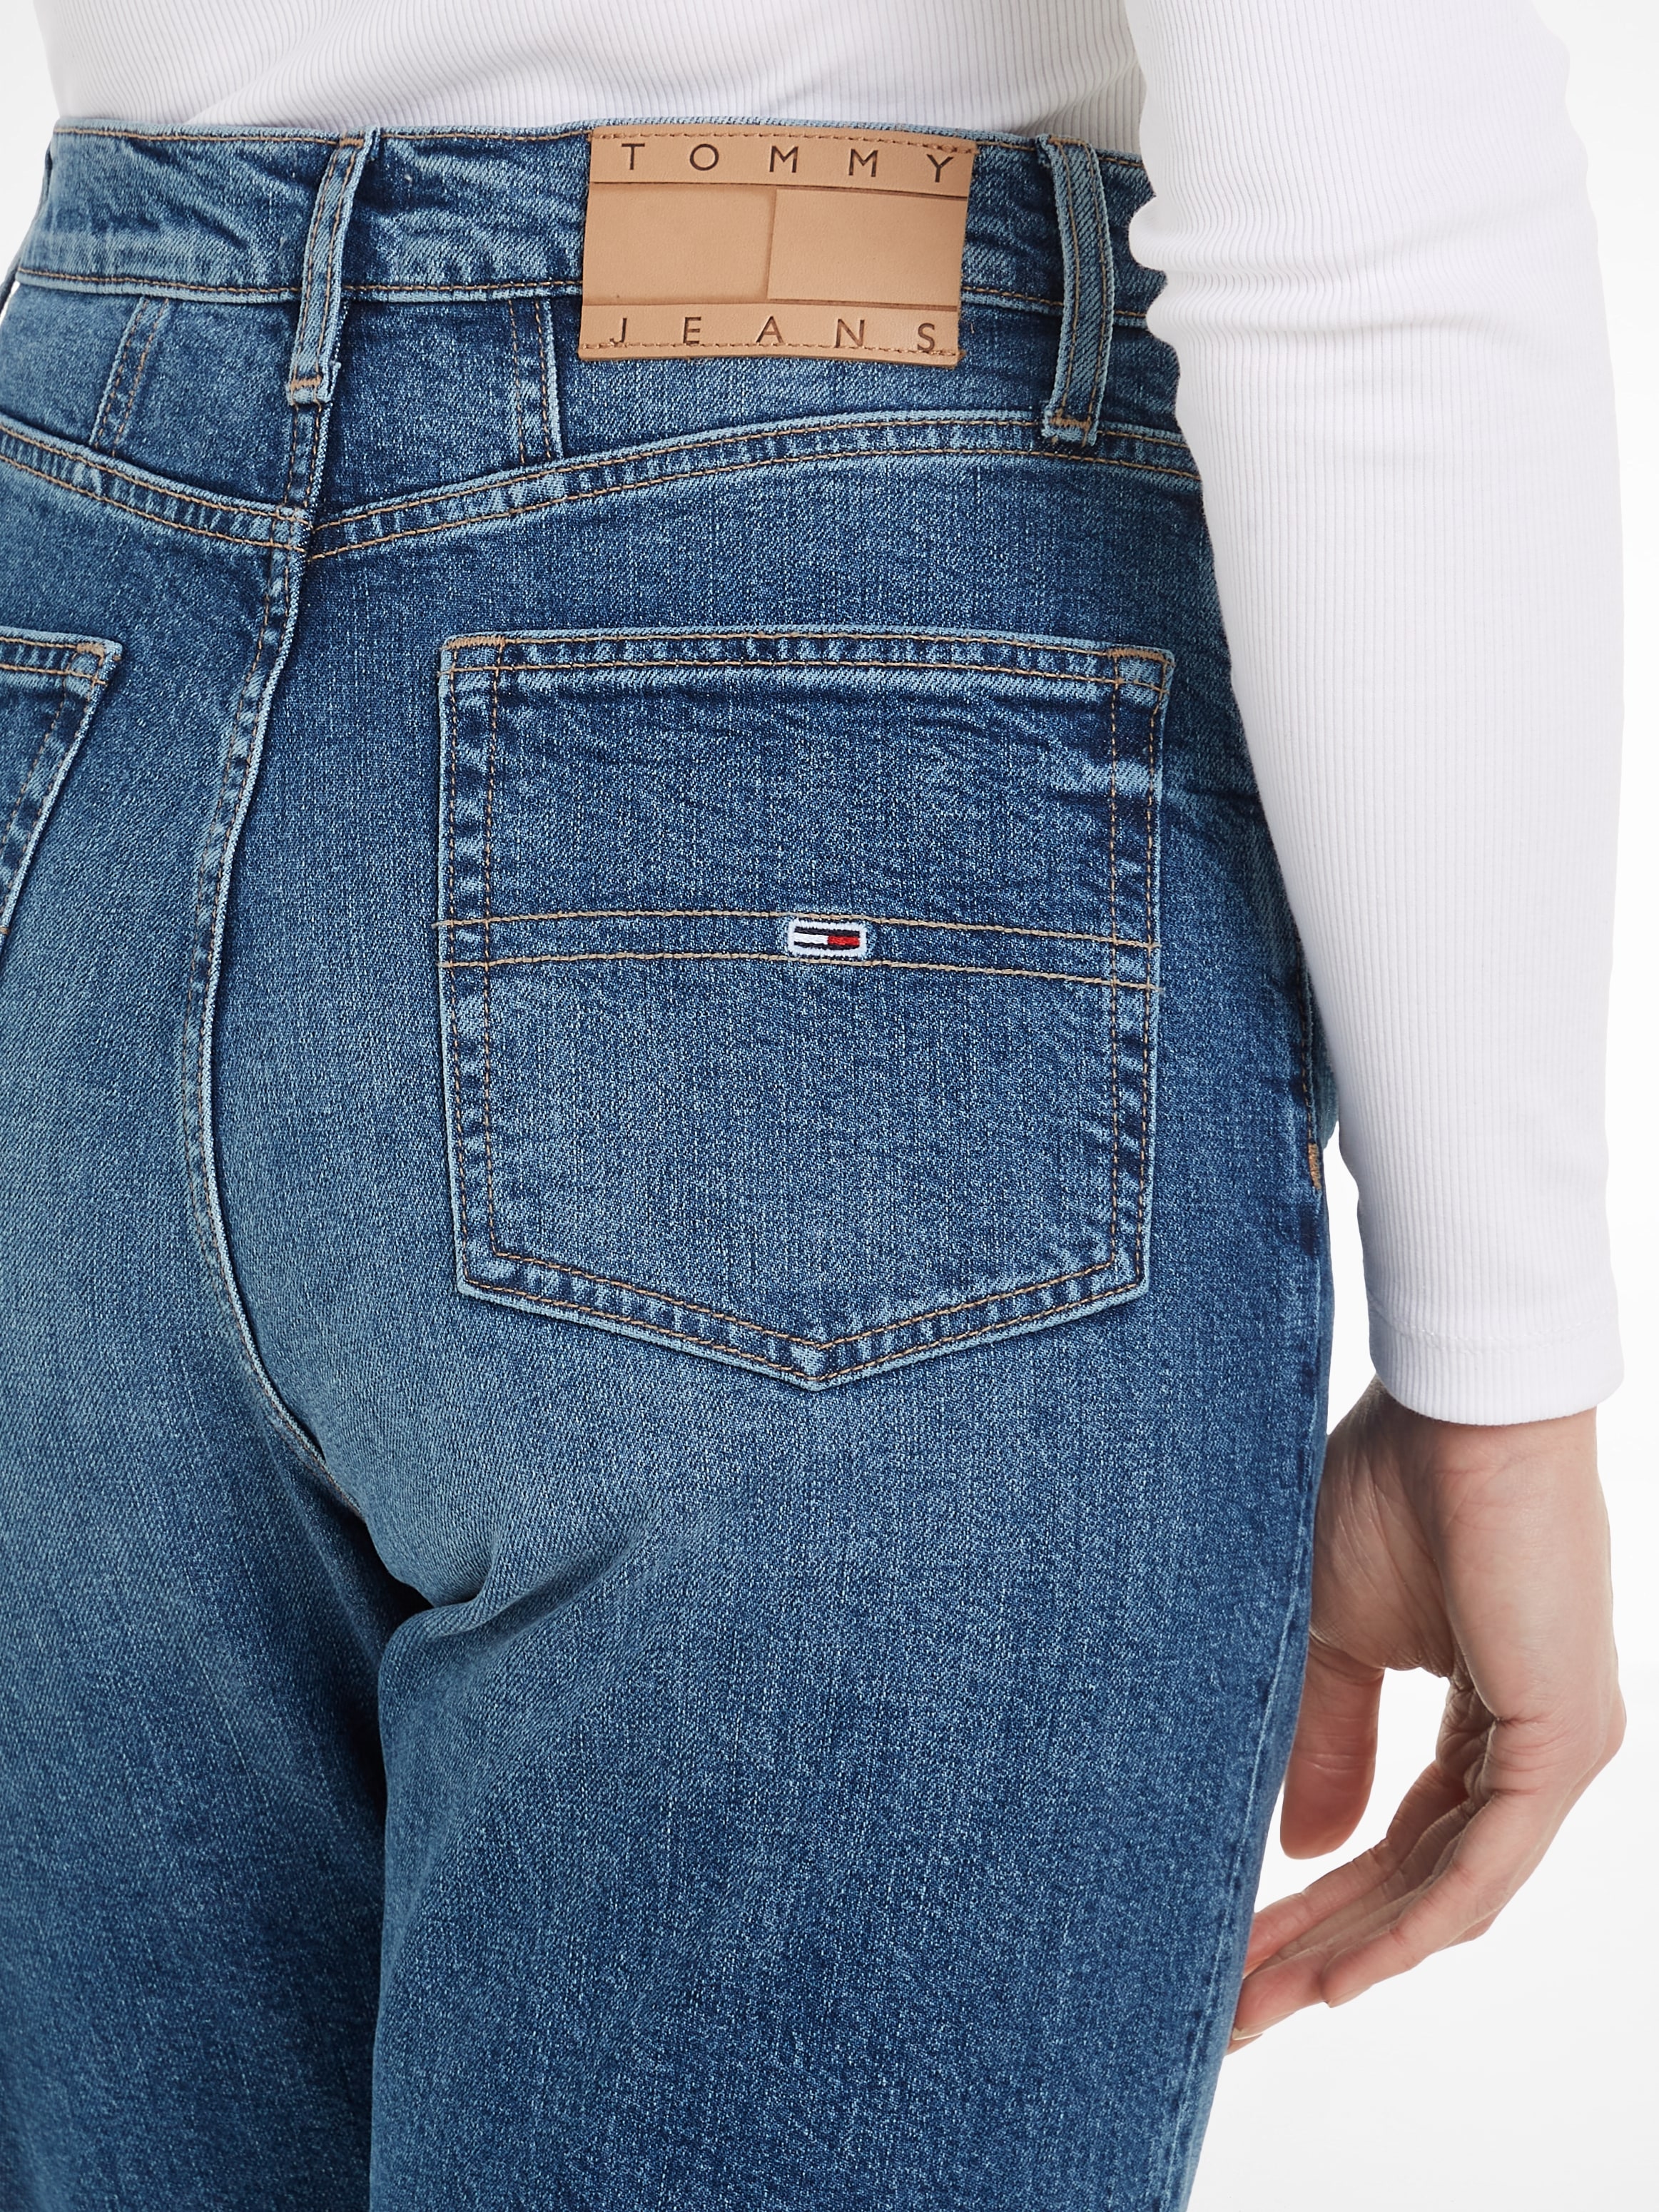 UH TPR bei Mom-Jeans JEAN »MOM Logopatch Jeans DG«, ♕ Tommy mit